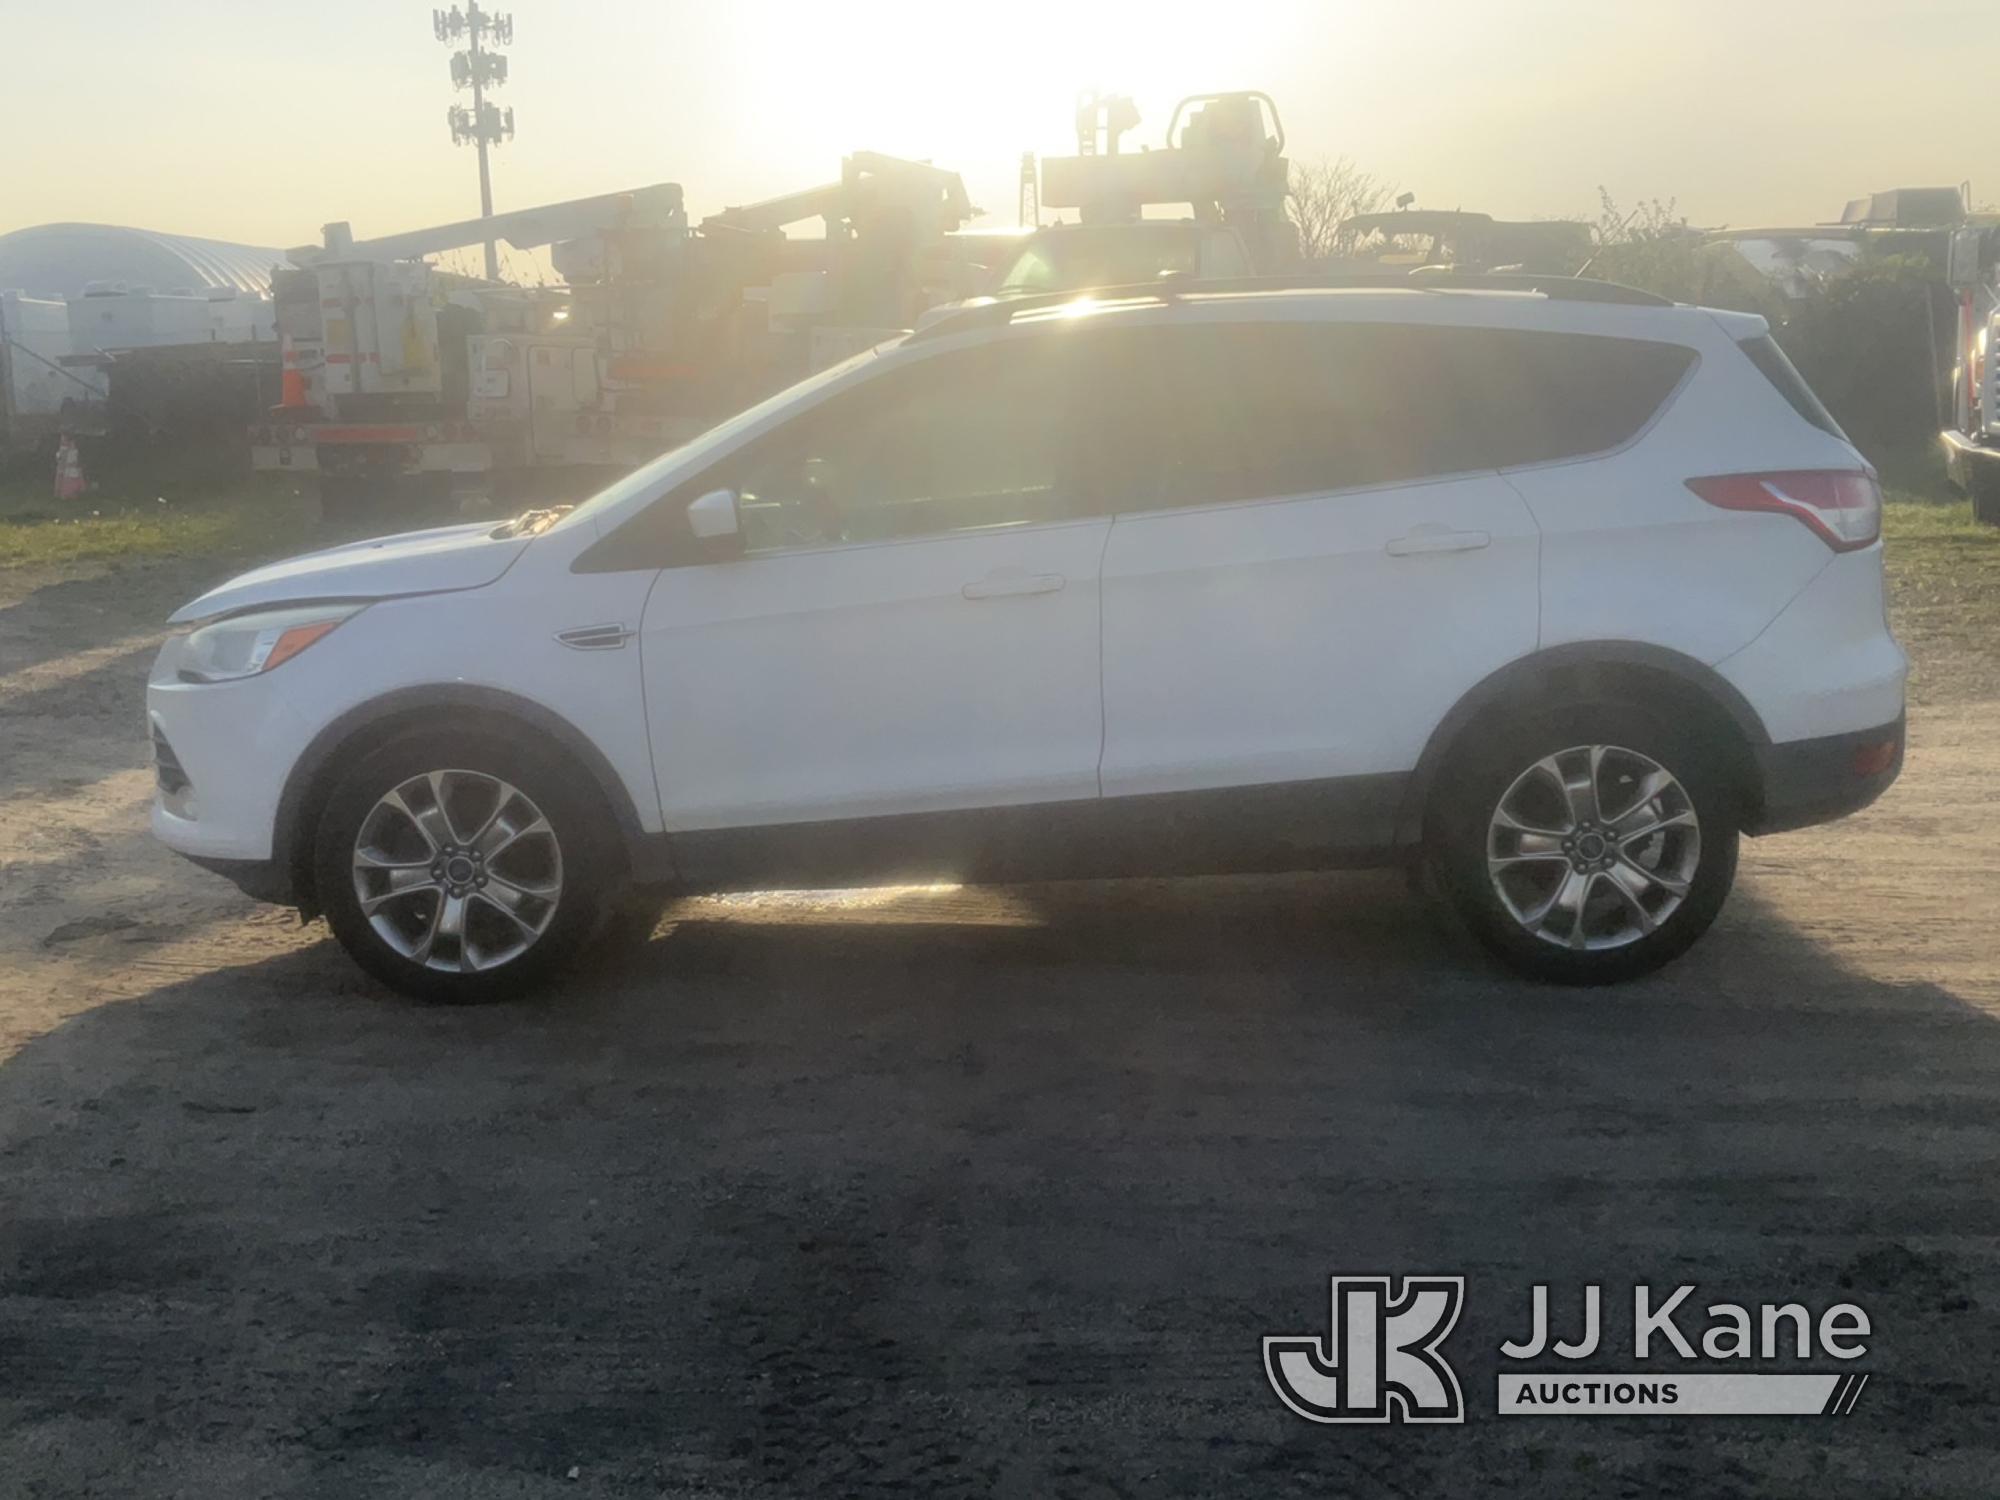 (Bellport, NY) 2014 Ford Escape 4x4 4-Door Sport Utility Vehicle Runs & Moves, Body & Rust Damage, A